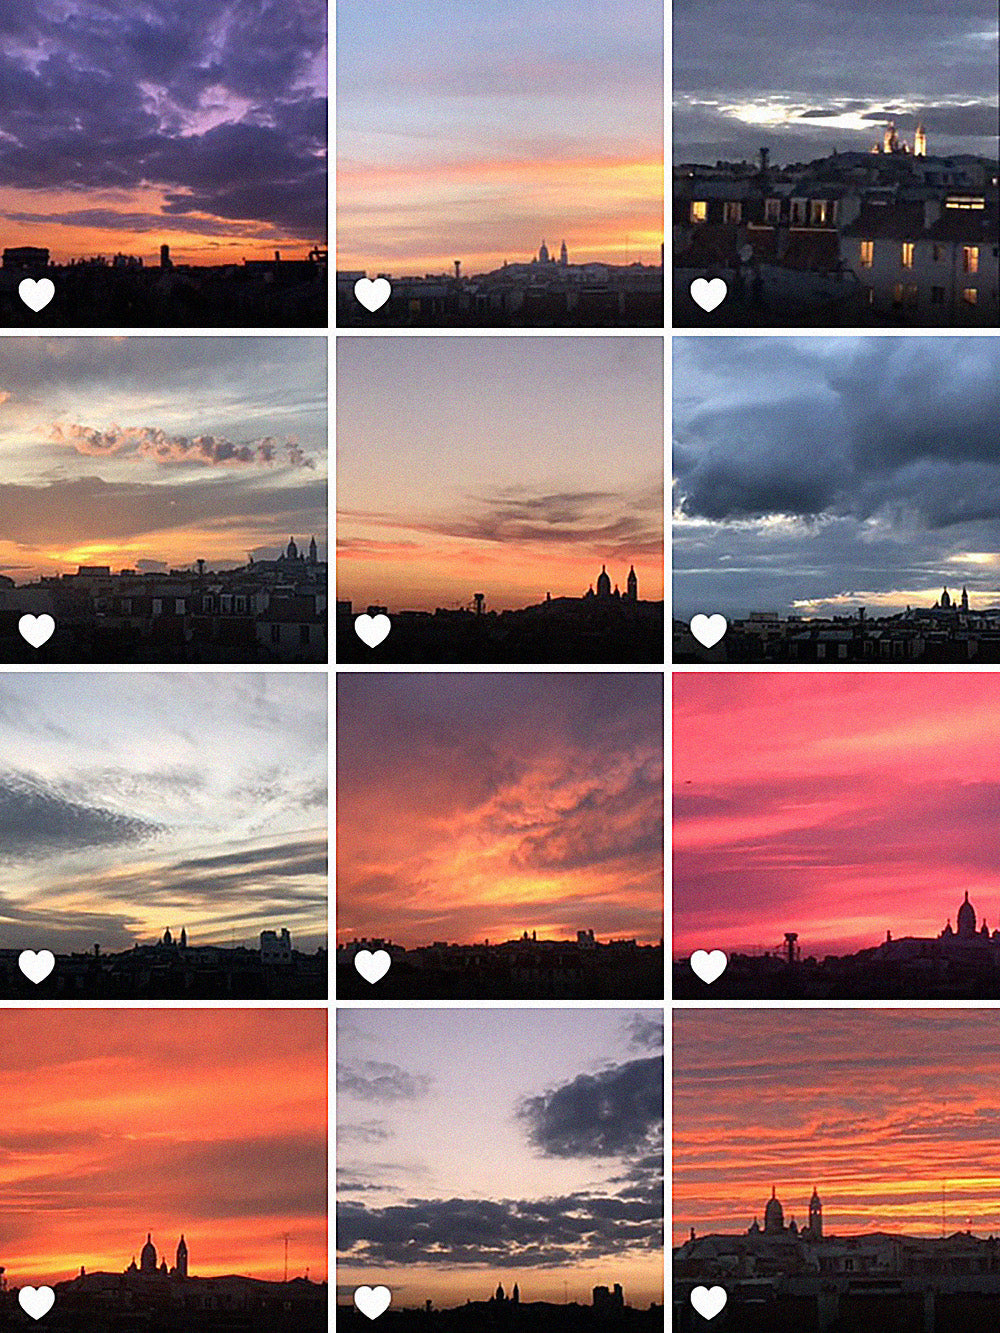 12 beautiful sunsets of Paris, photographed by Veronique Zucca during Covid-19 lockdown